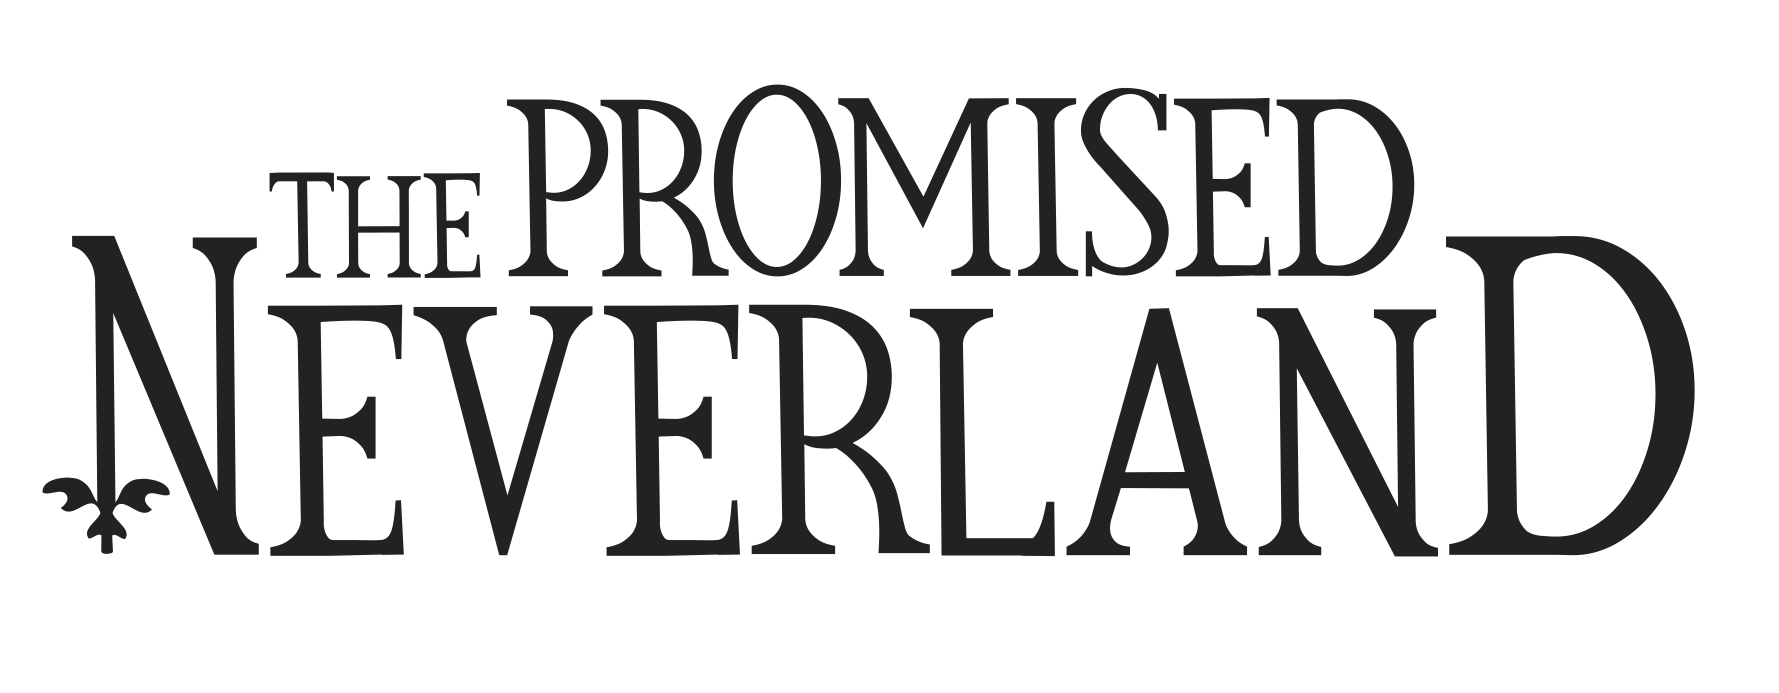 The Promised Neverland Logo Png The Best Promised Neverland Images And Photos Finder 